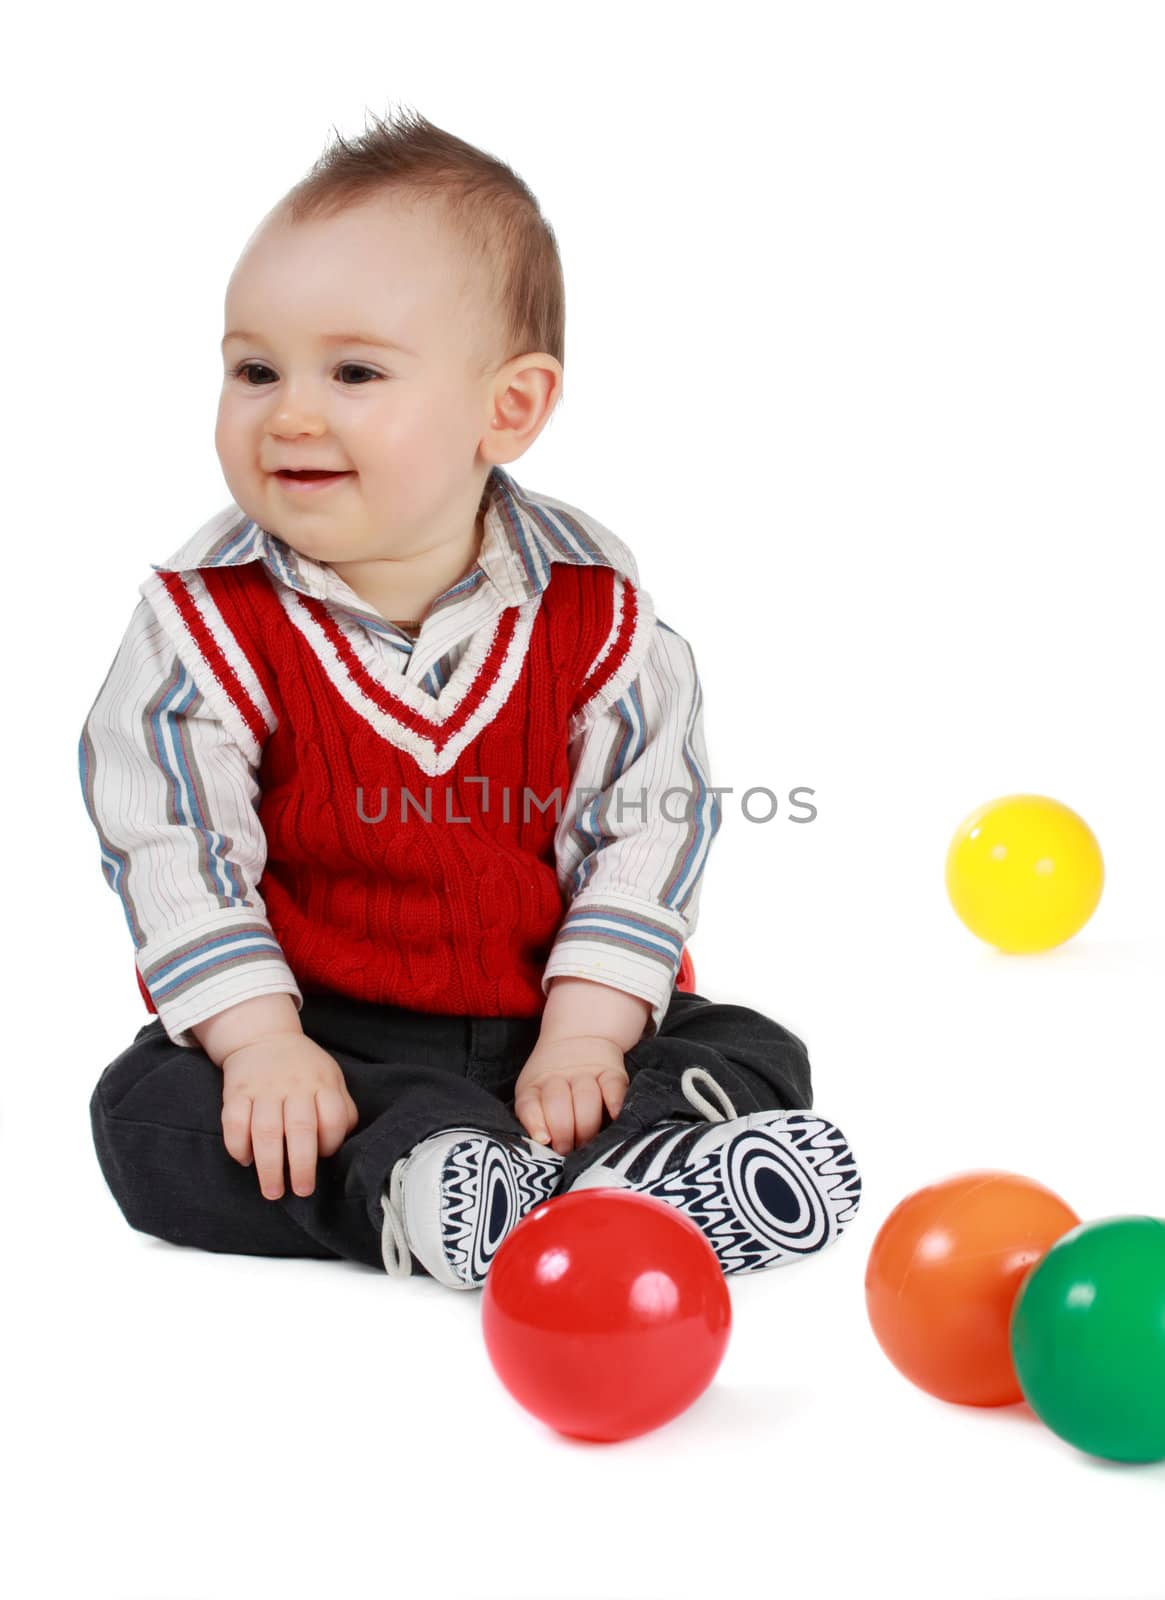 adorable 8 months cacasian baby boy, white background